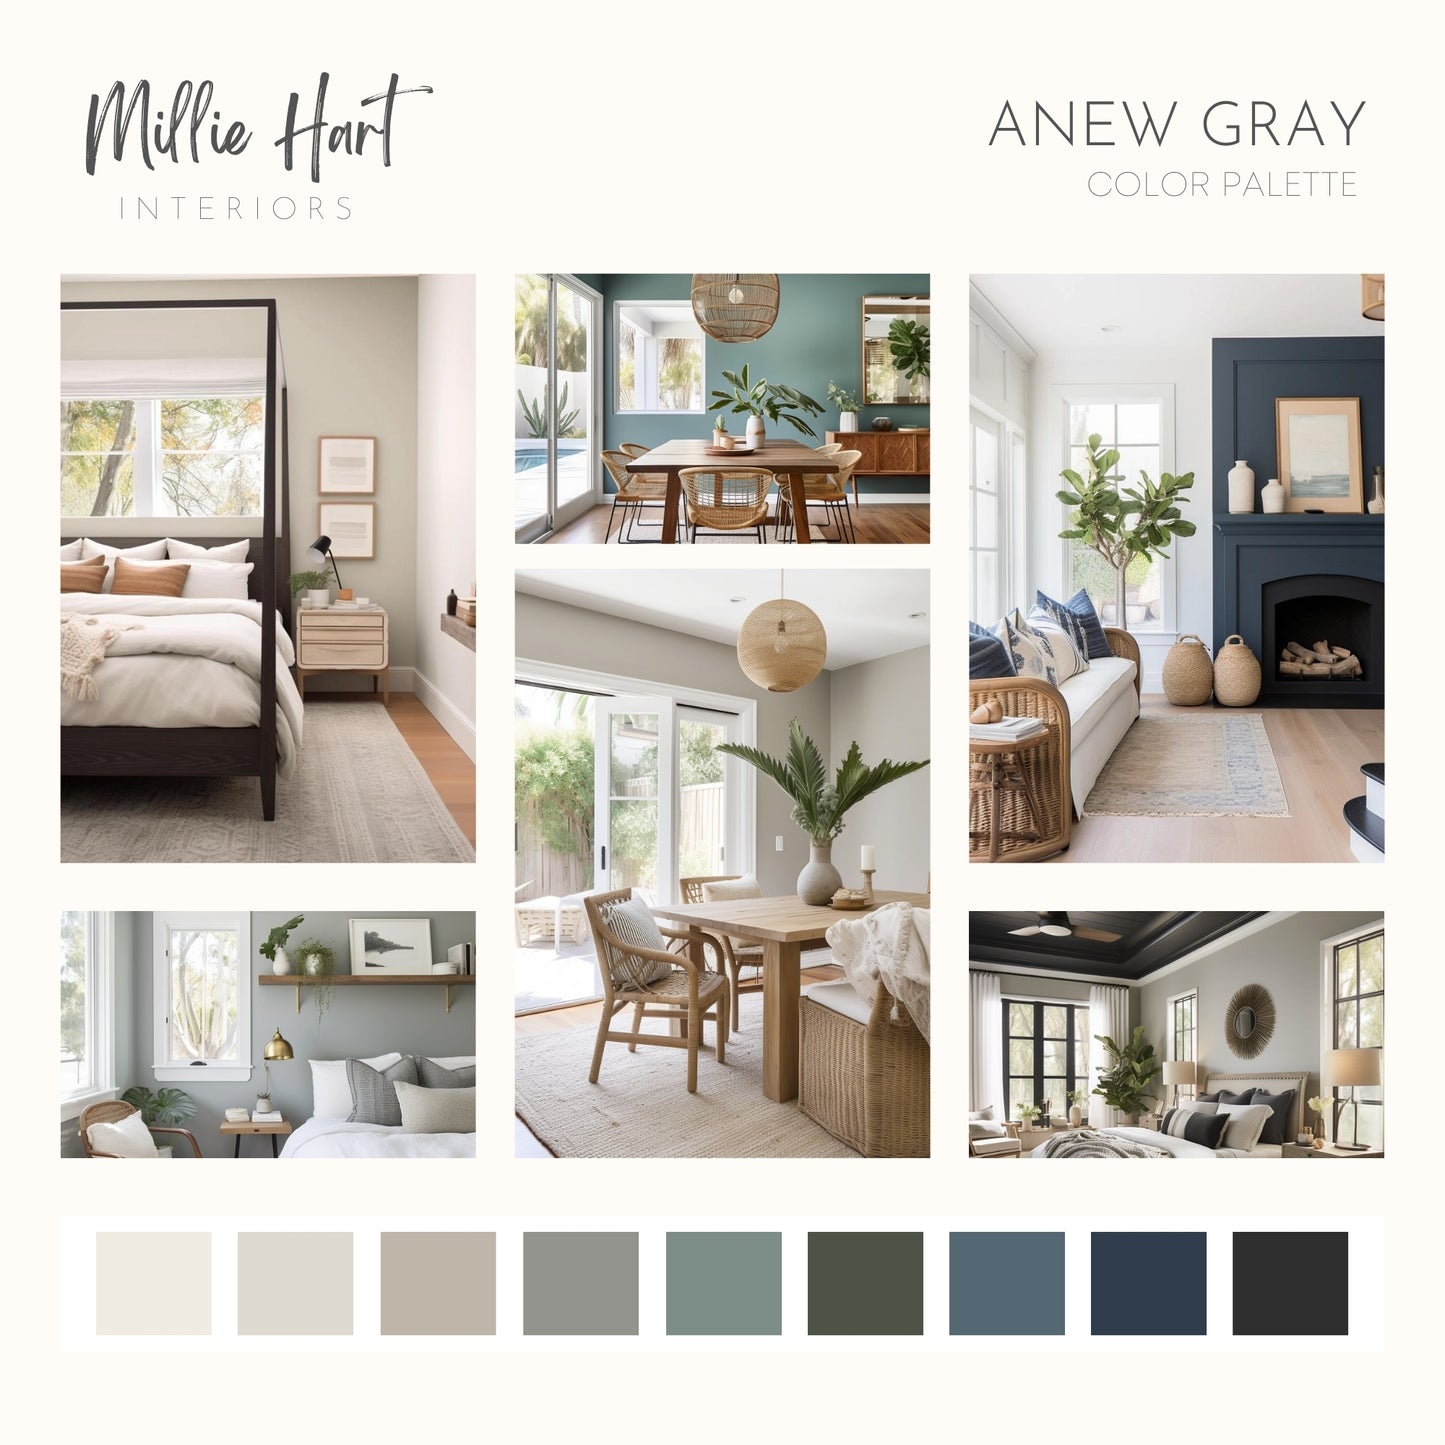 Anew Gray Sherwin Williams Paint Palette - Modern Neutral Interior Paint Colors for Home - Coordinating Interior Design Color Palette, Sherwin Williams Drift of Mist